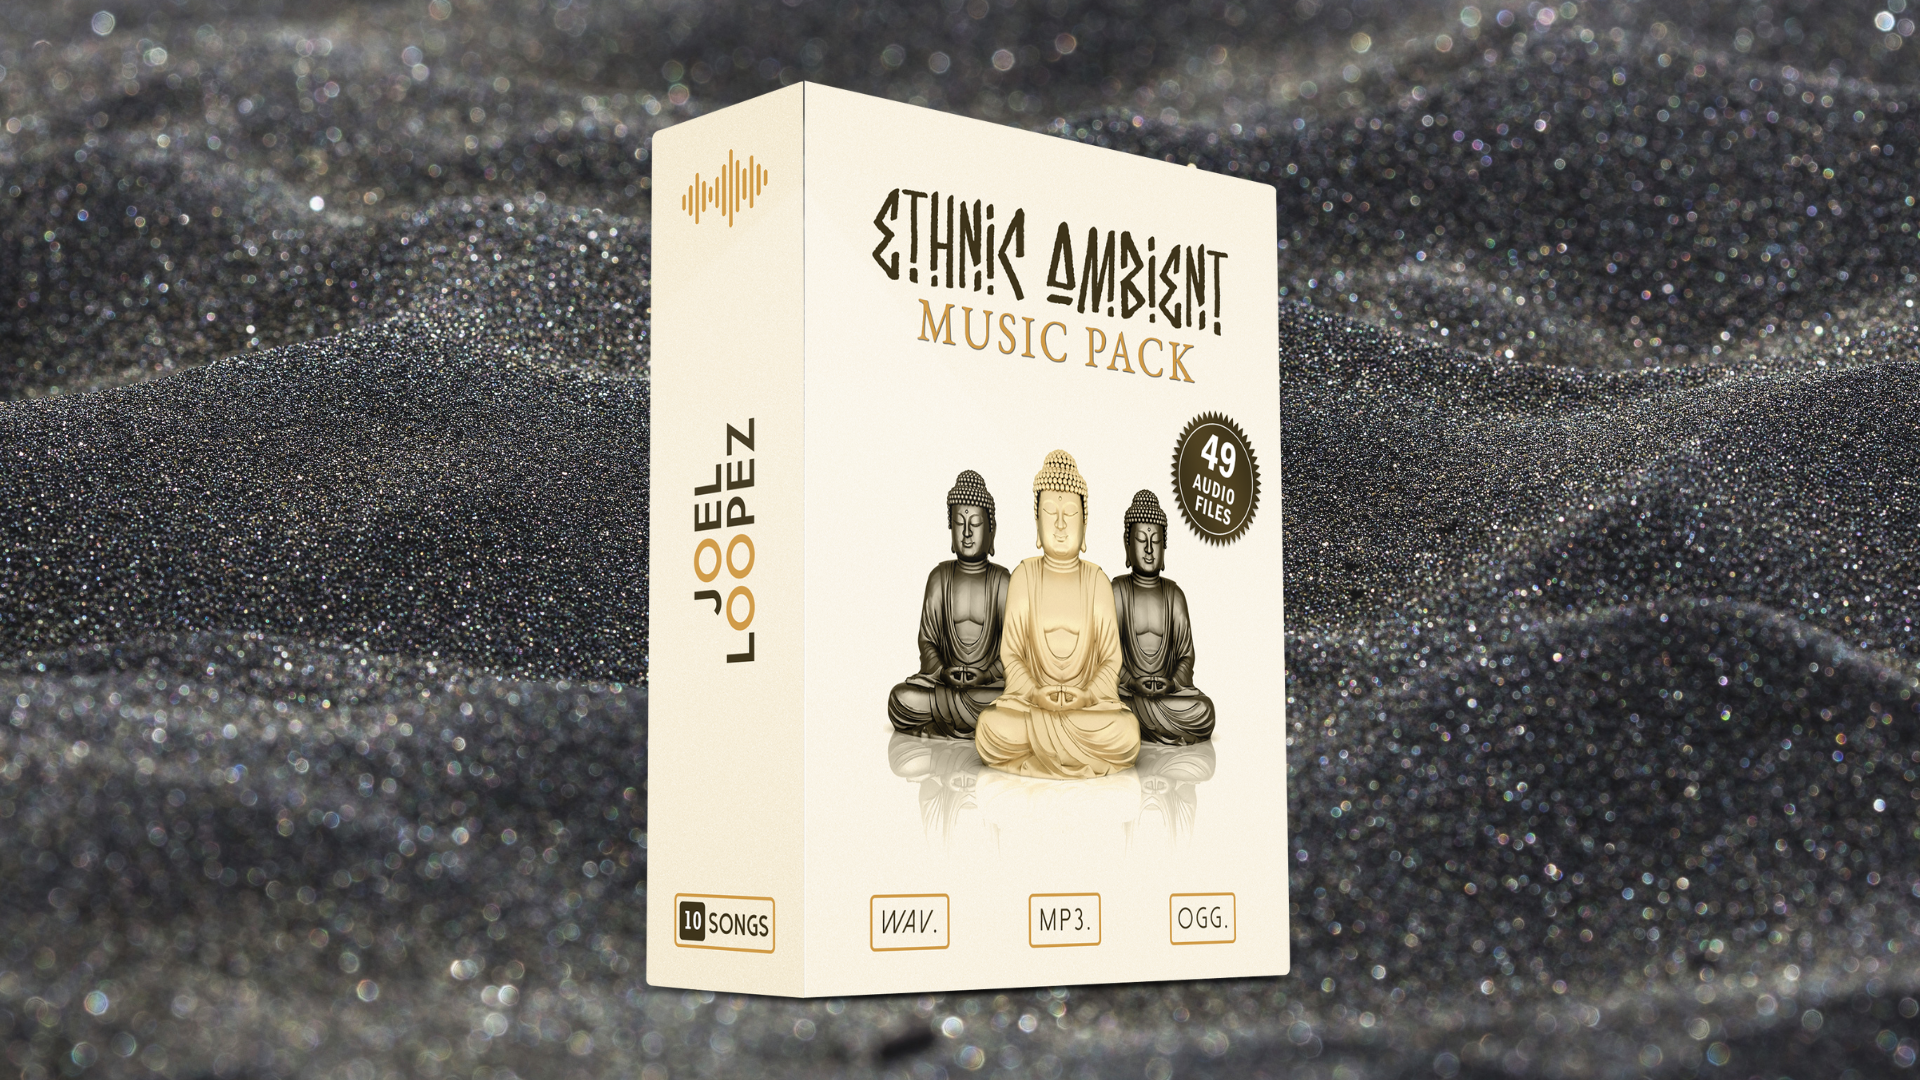 Ethnic Ambient Music Pack